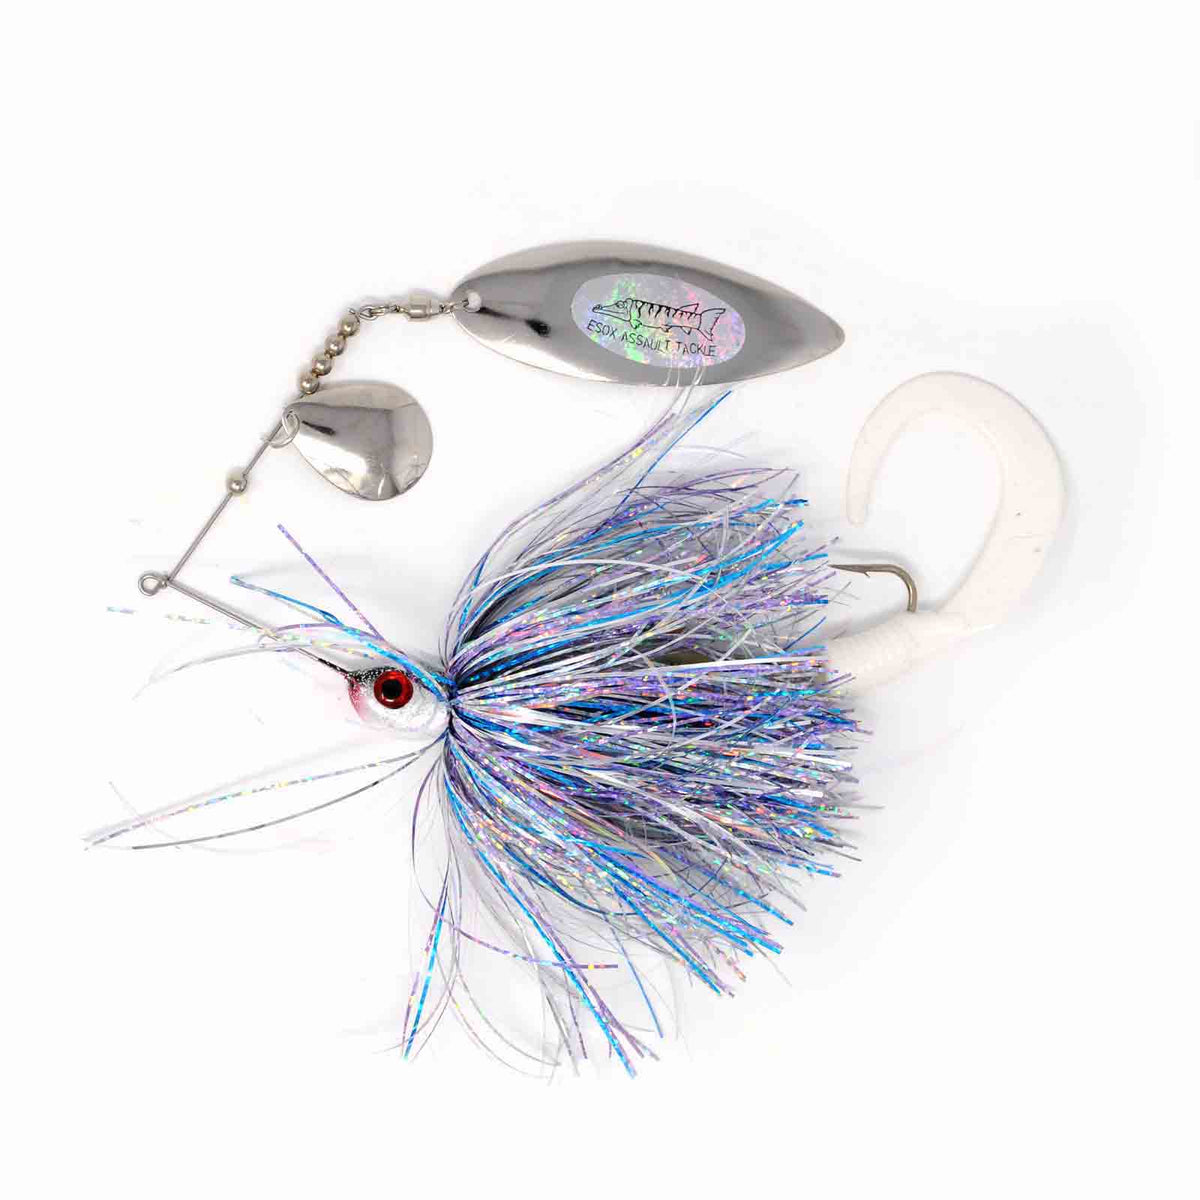 Bucktail Musky Pike Muskie Fishing Lure Spinner Bait 8 Long 1.7 Oz  Colorado 8 Blades 5/0 Treble Hook (White), Spinners & Spinnerbaits -   Canada